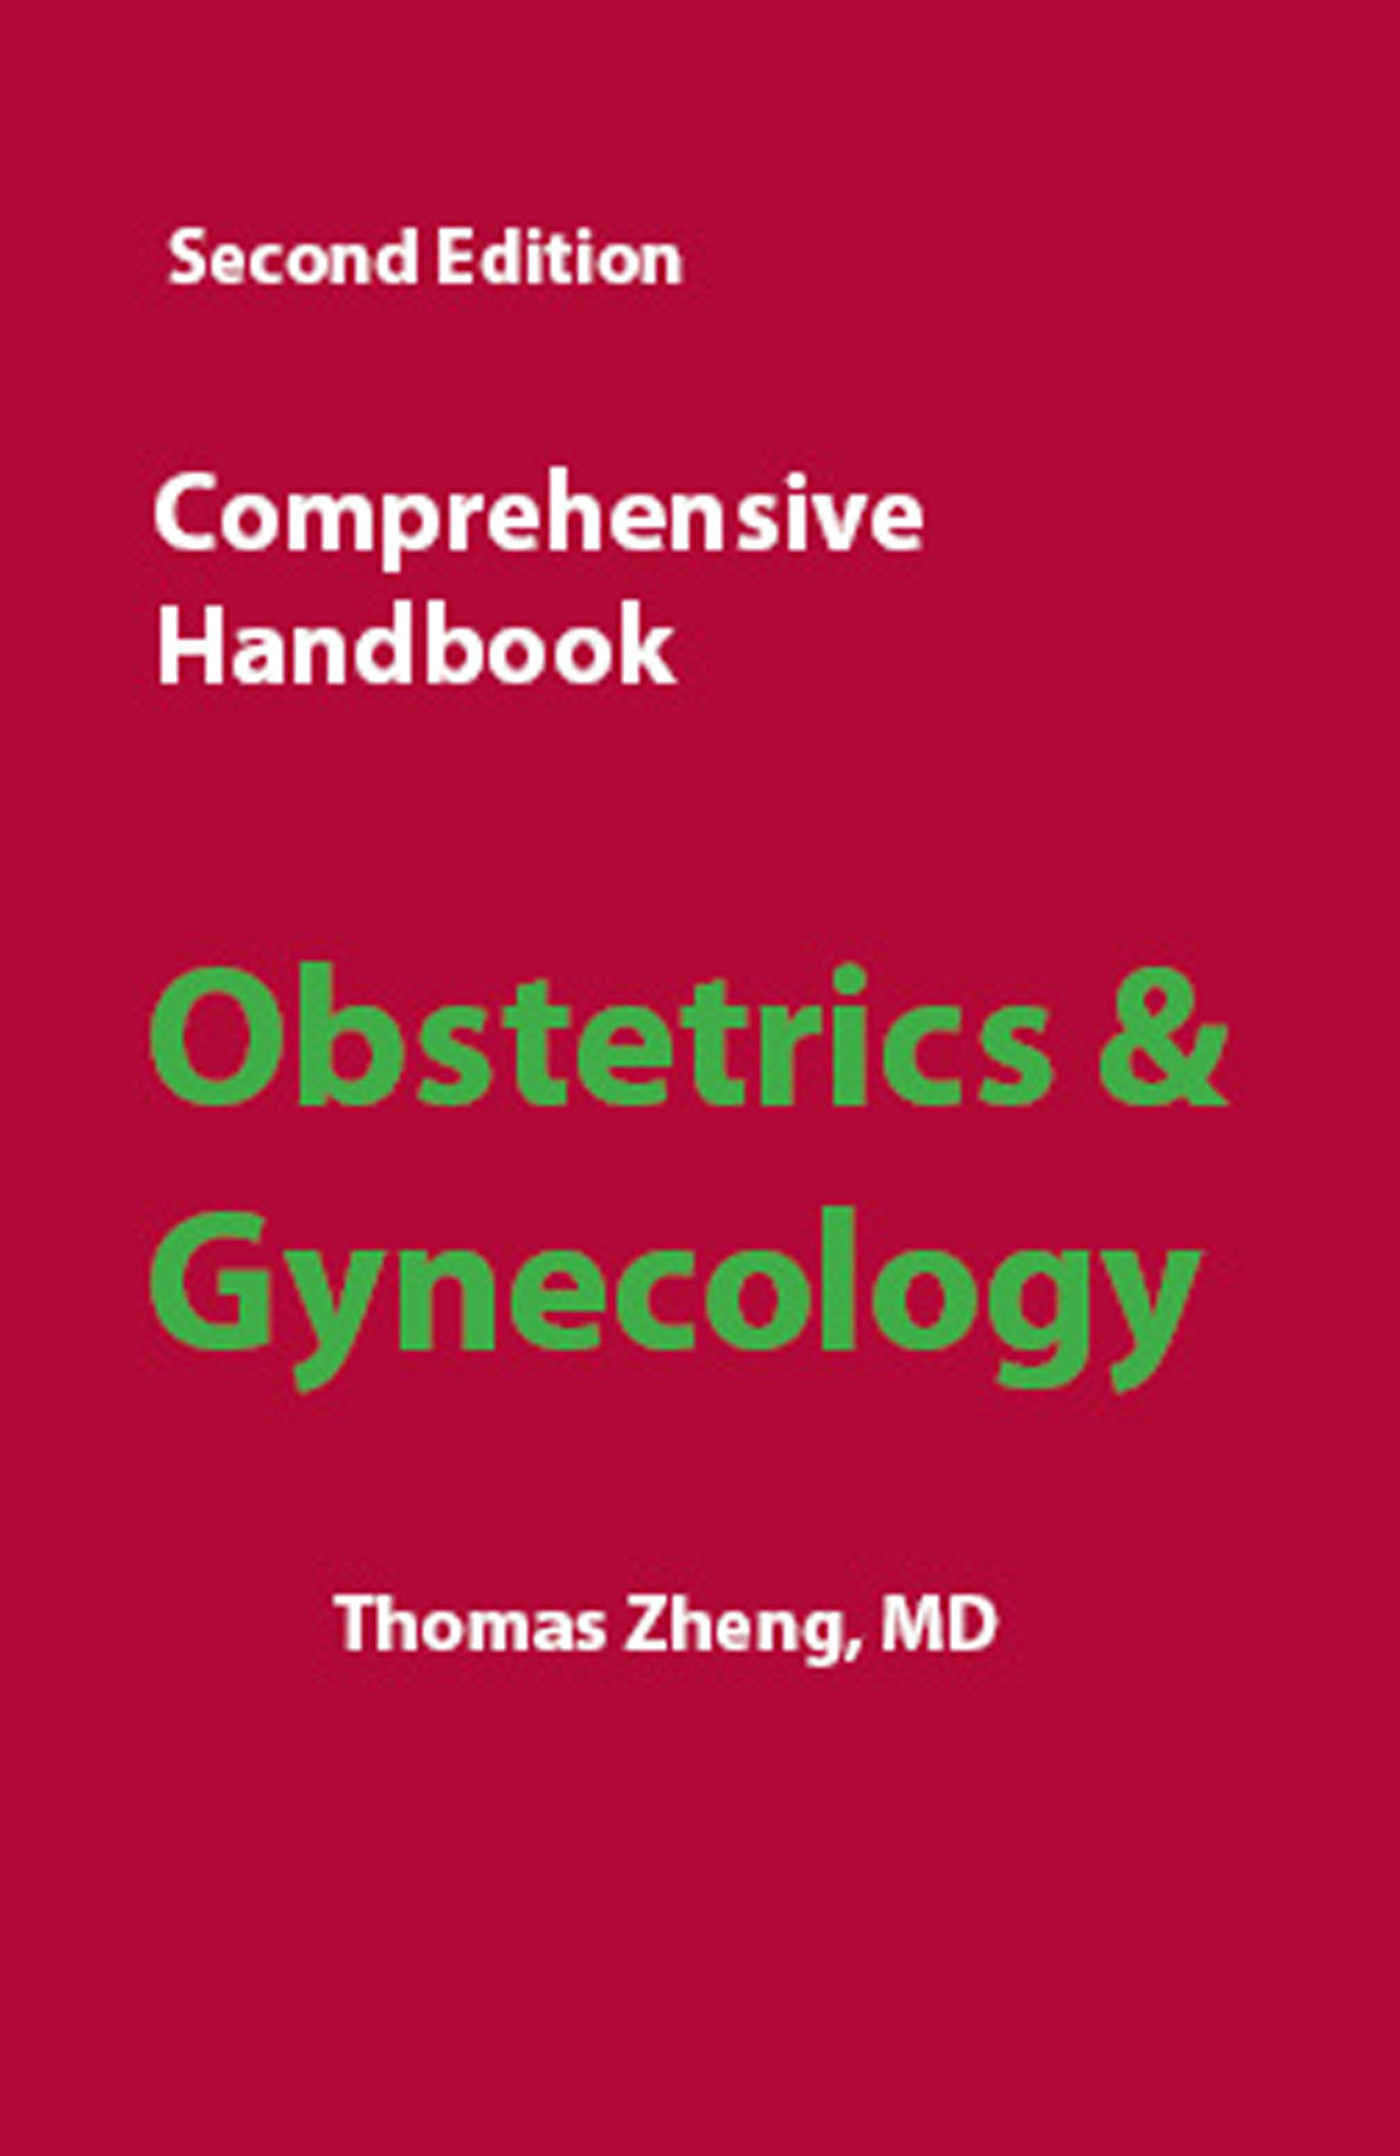 Cover Comprehensive Handbook Obstetrics & Gynecology 2nd Edition